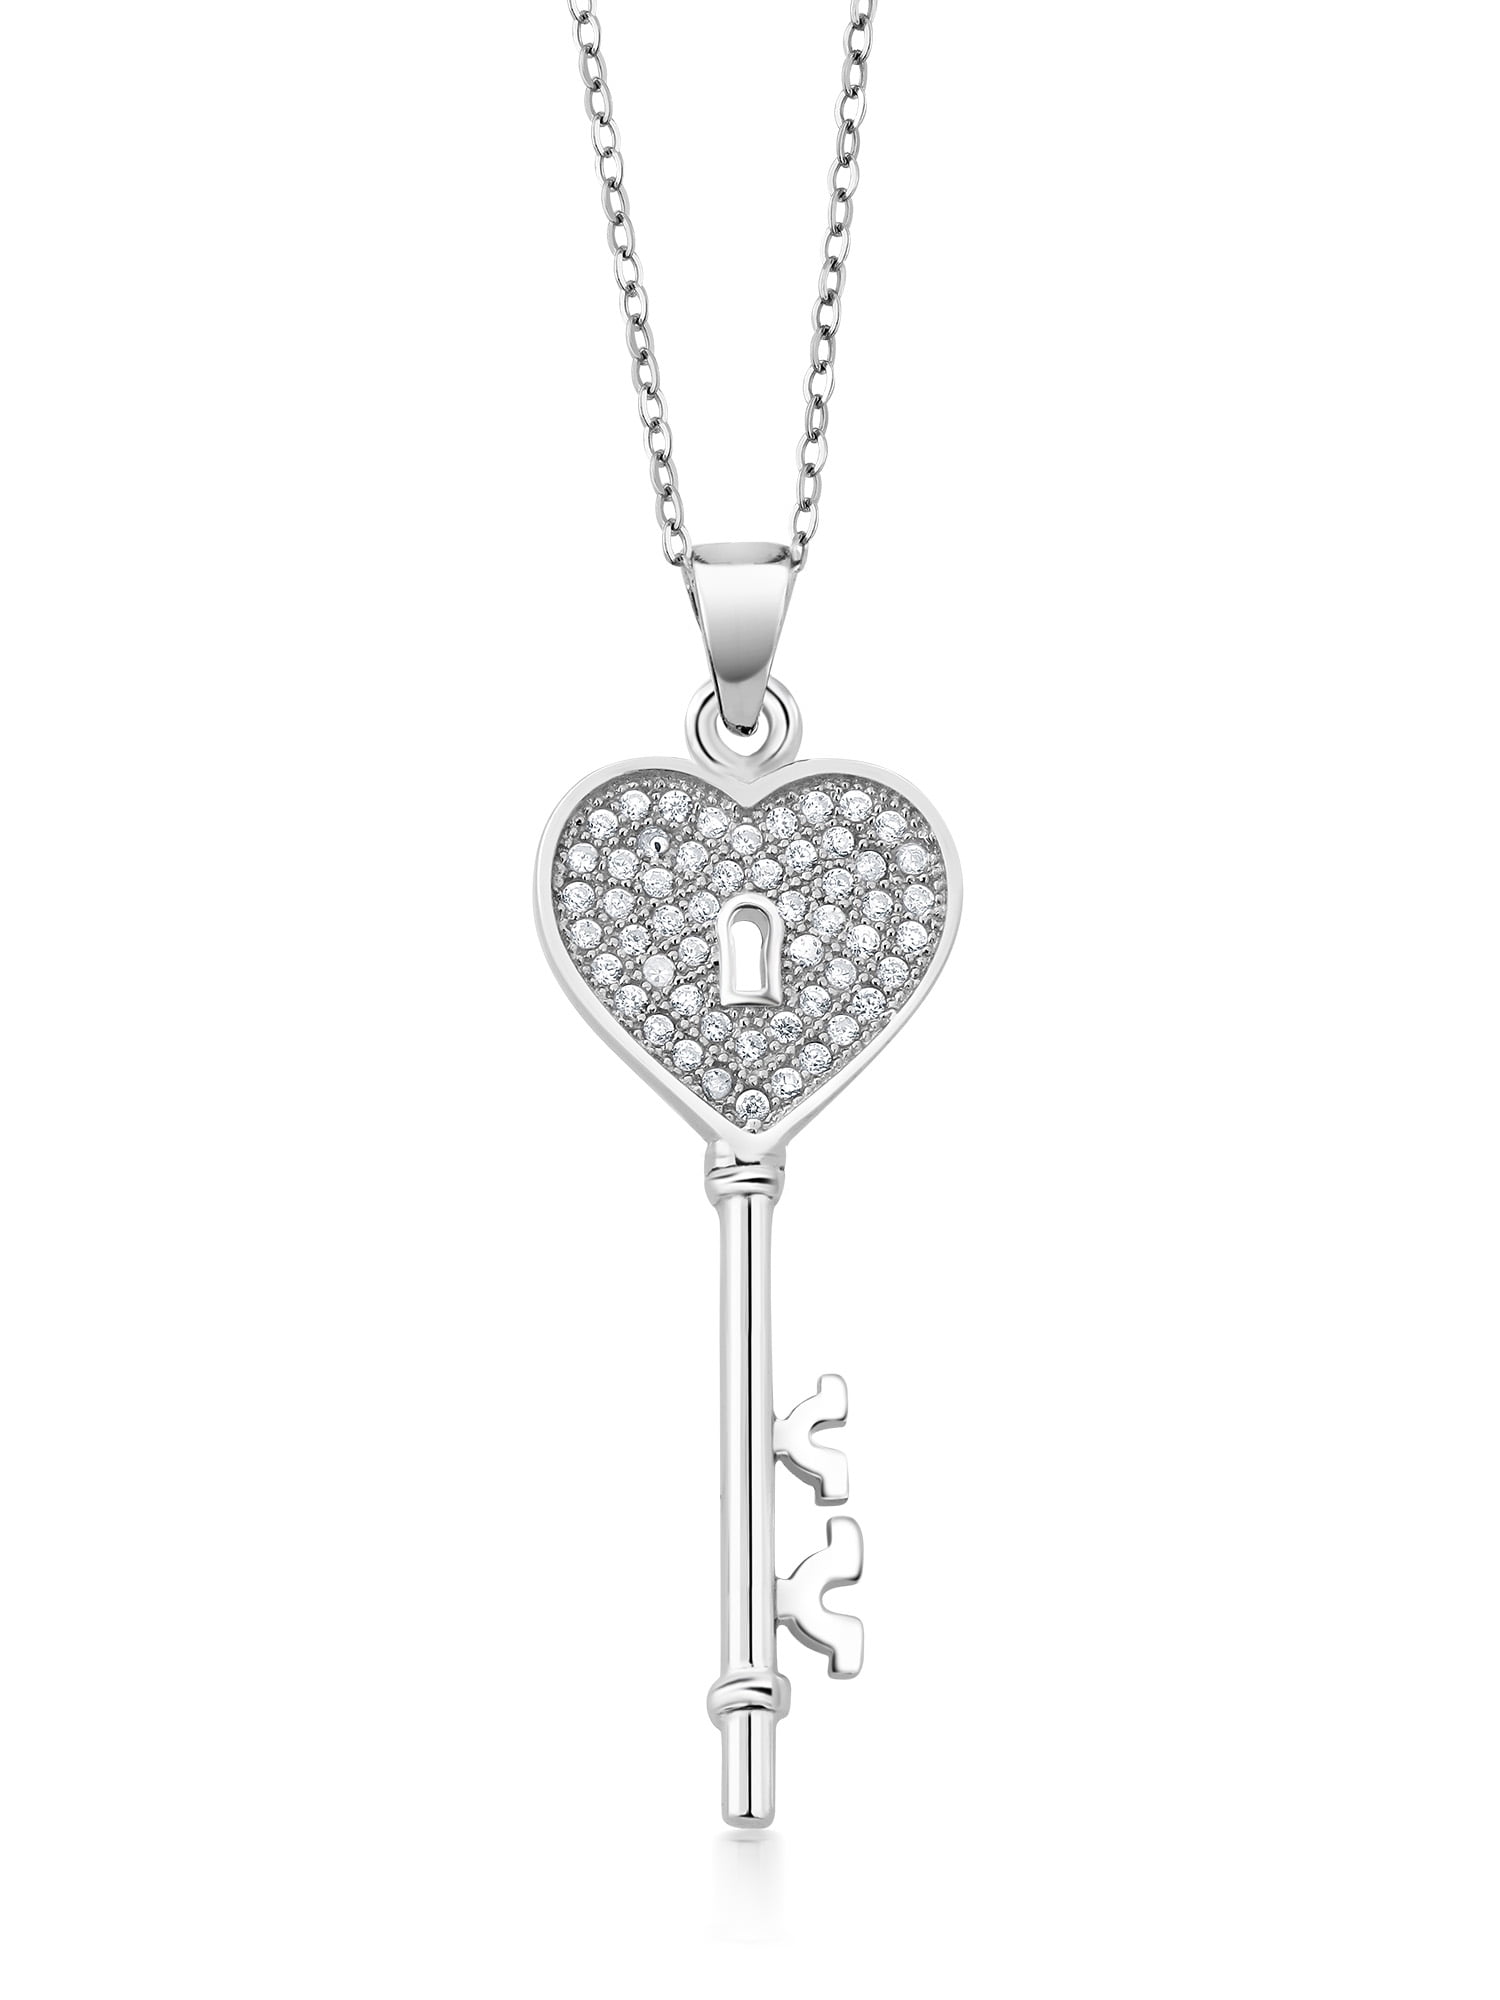 Dahlia Lock and Key Red Cubic Zirconia Silver Pendant Necklace